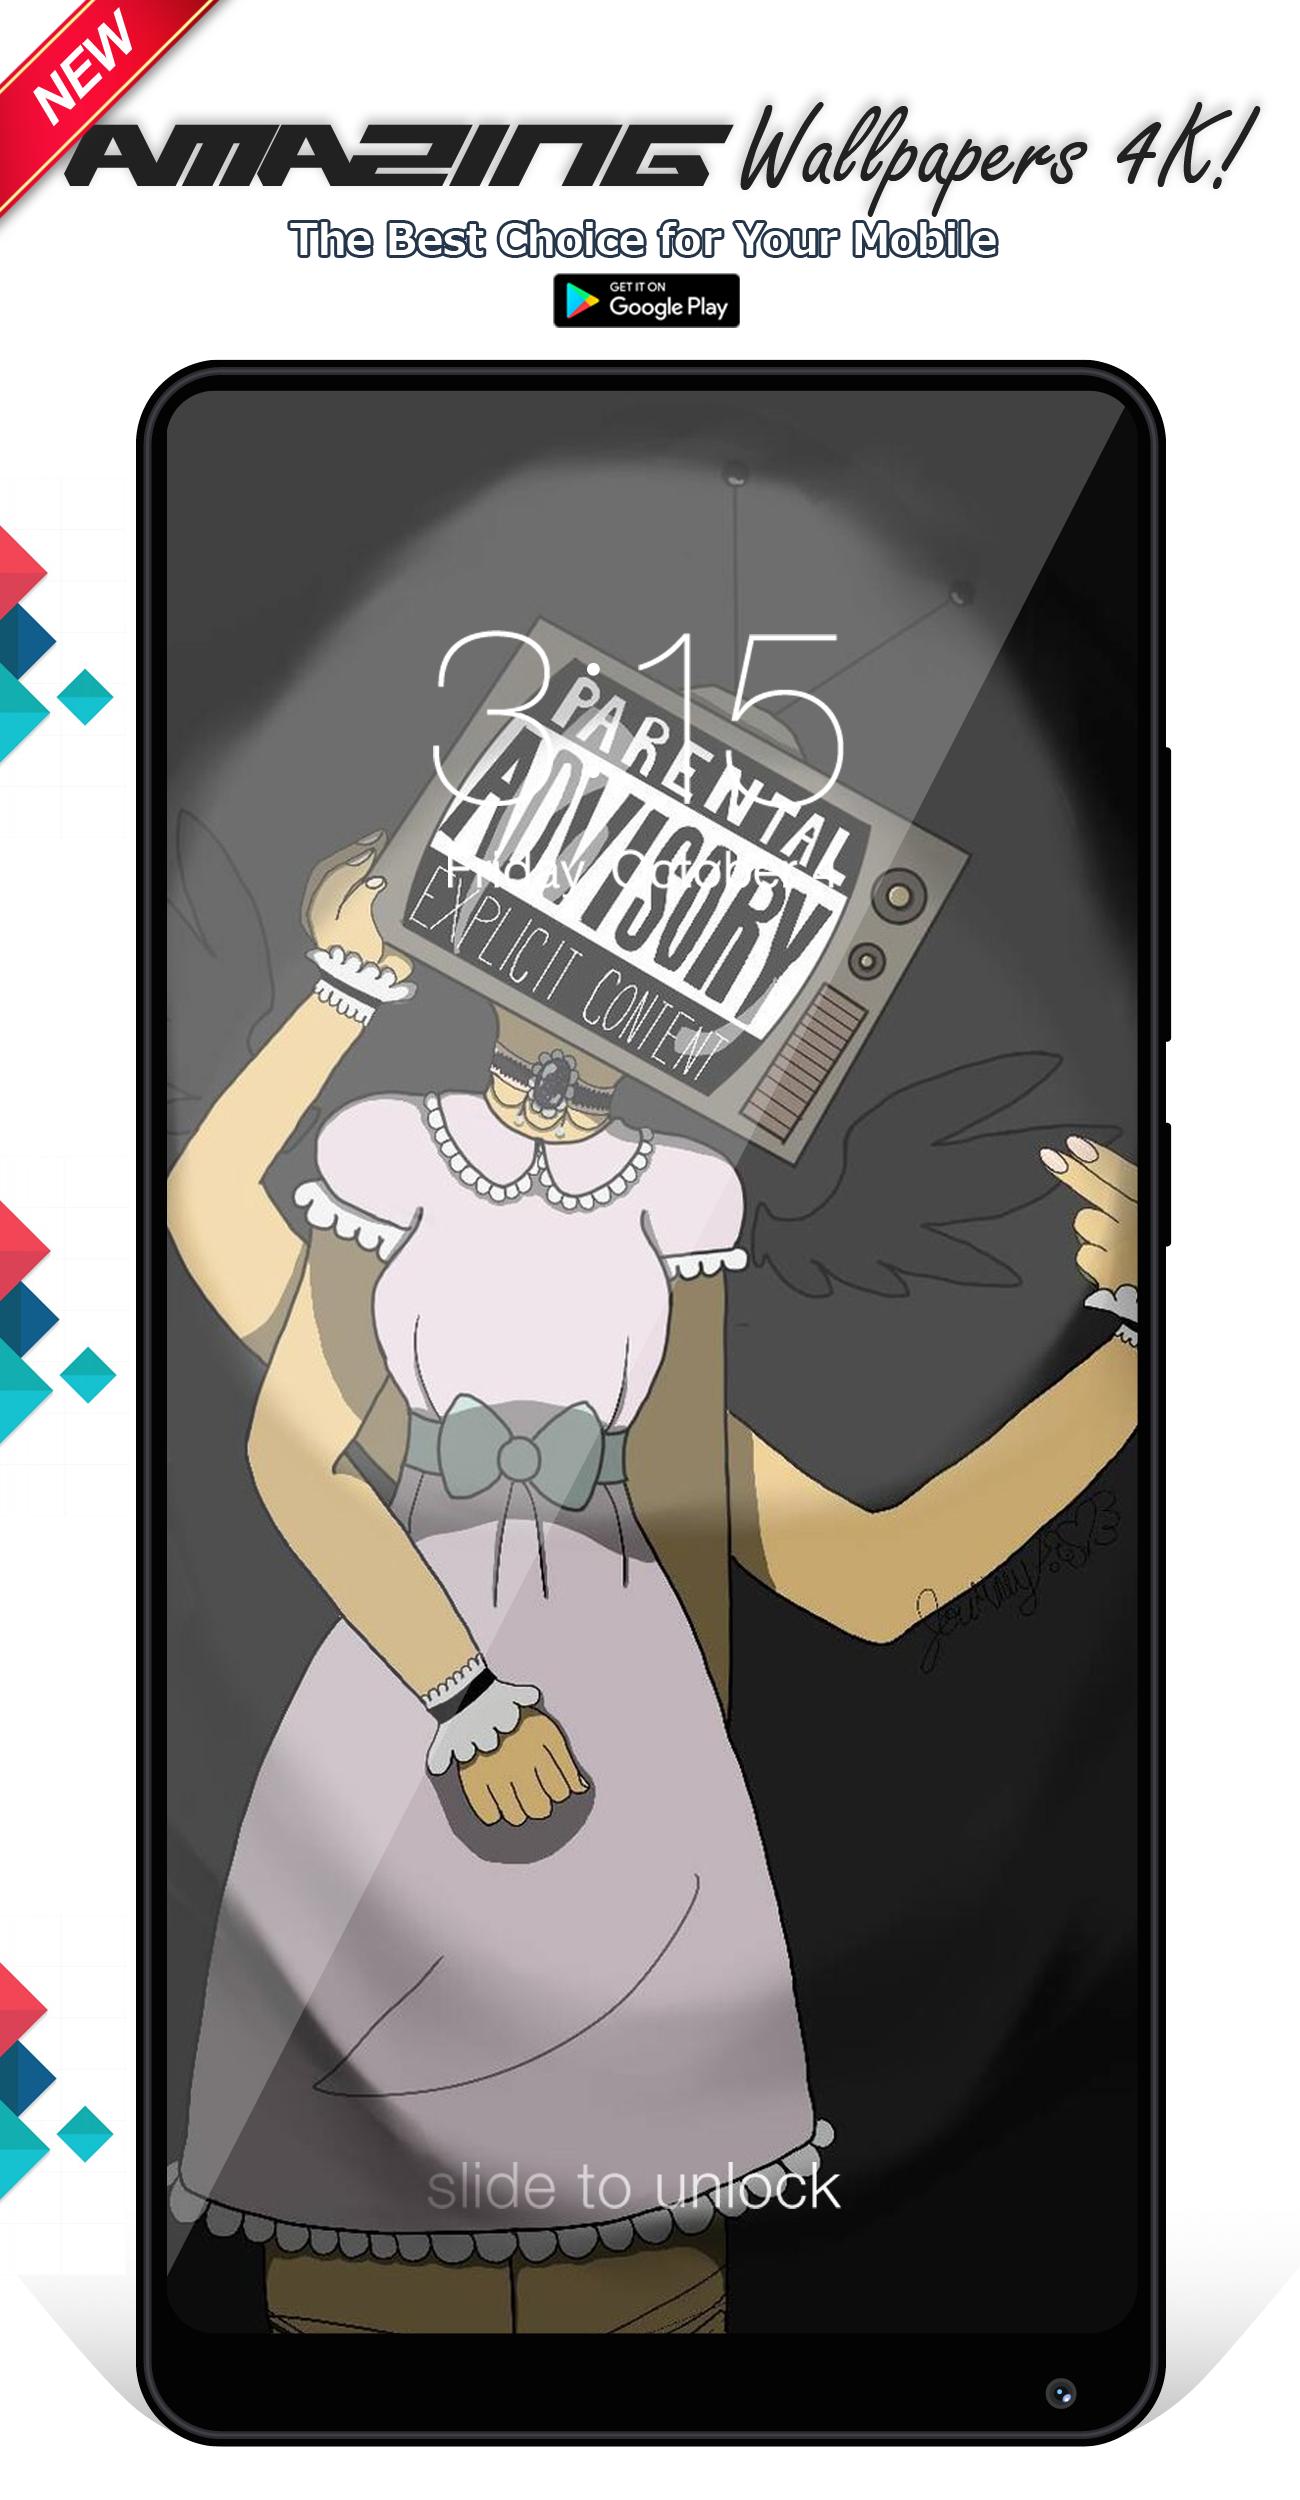 Parental Advisory Wallpapers Hd 4k For Android Apk Download Choose from 170000+ parental advisory logo graphic resources and download in the form of png, eps, ai or psd. parental advisory wallpapers hd 4k for